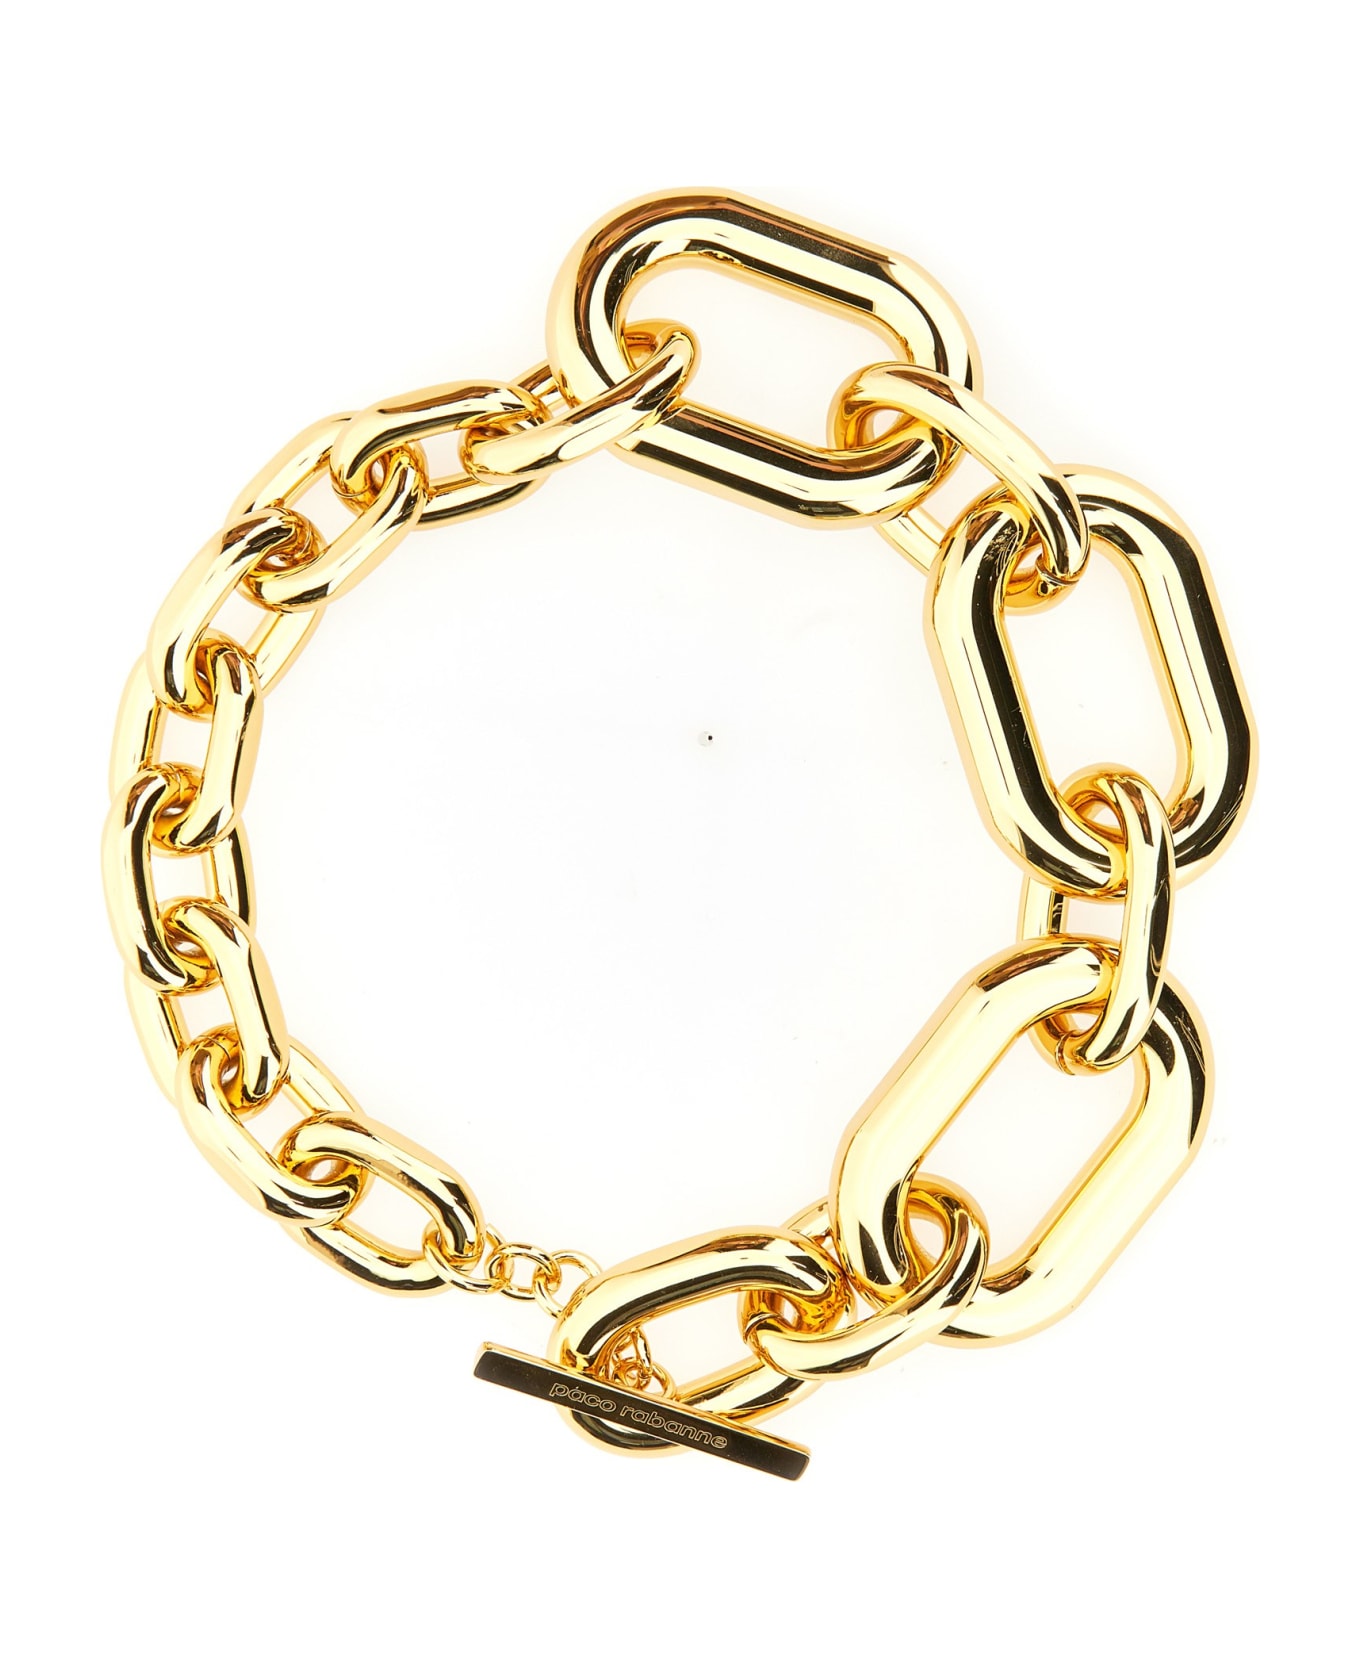 Paco Rabanne Xi Link Necklace - Gold